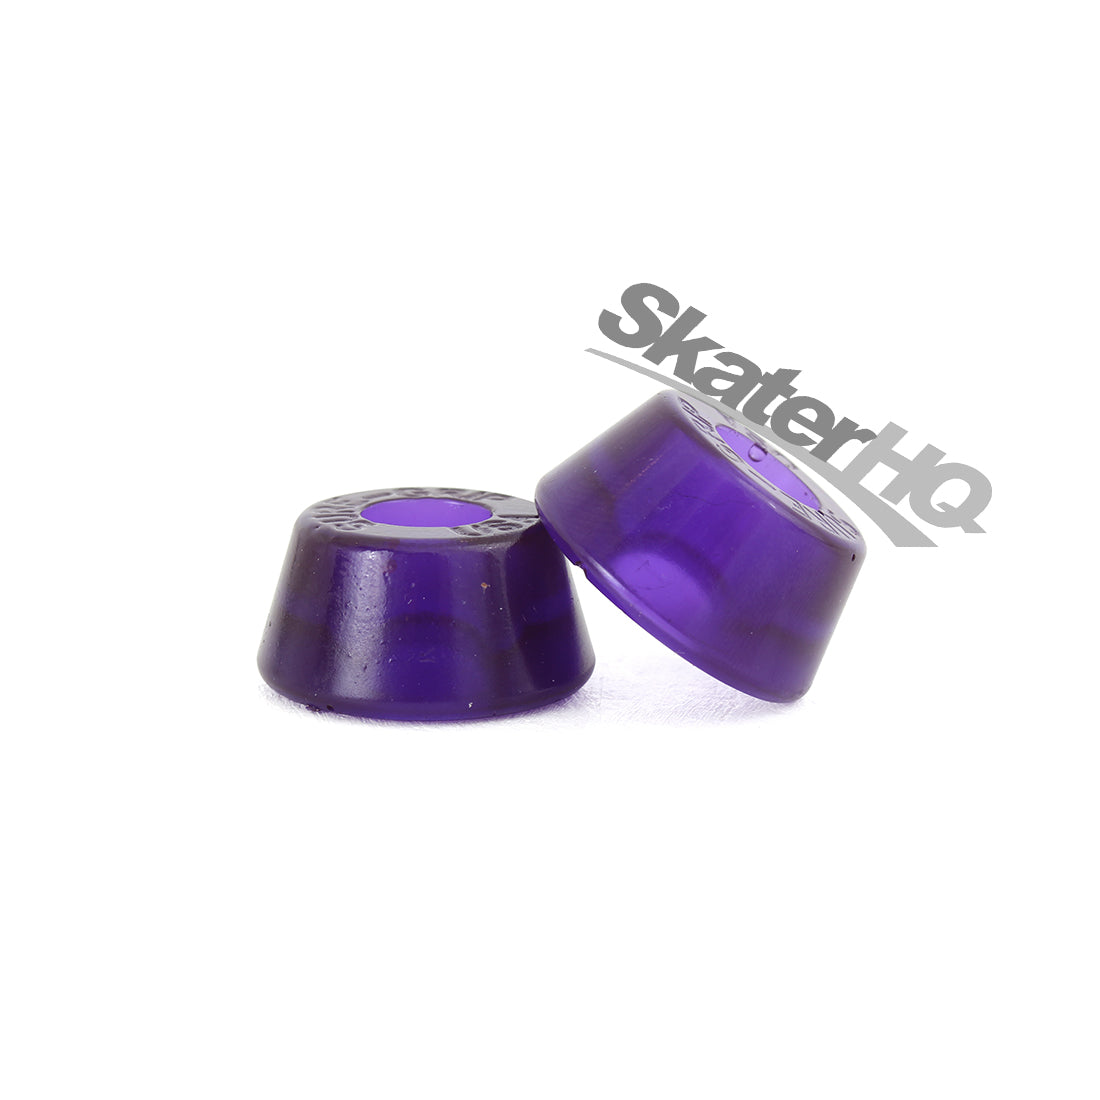 Sure-Grip Conical Cushions 85a 4pk - Purple Roller Skate Hardware and Parts